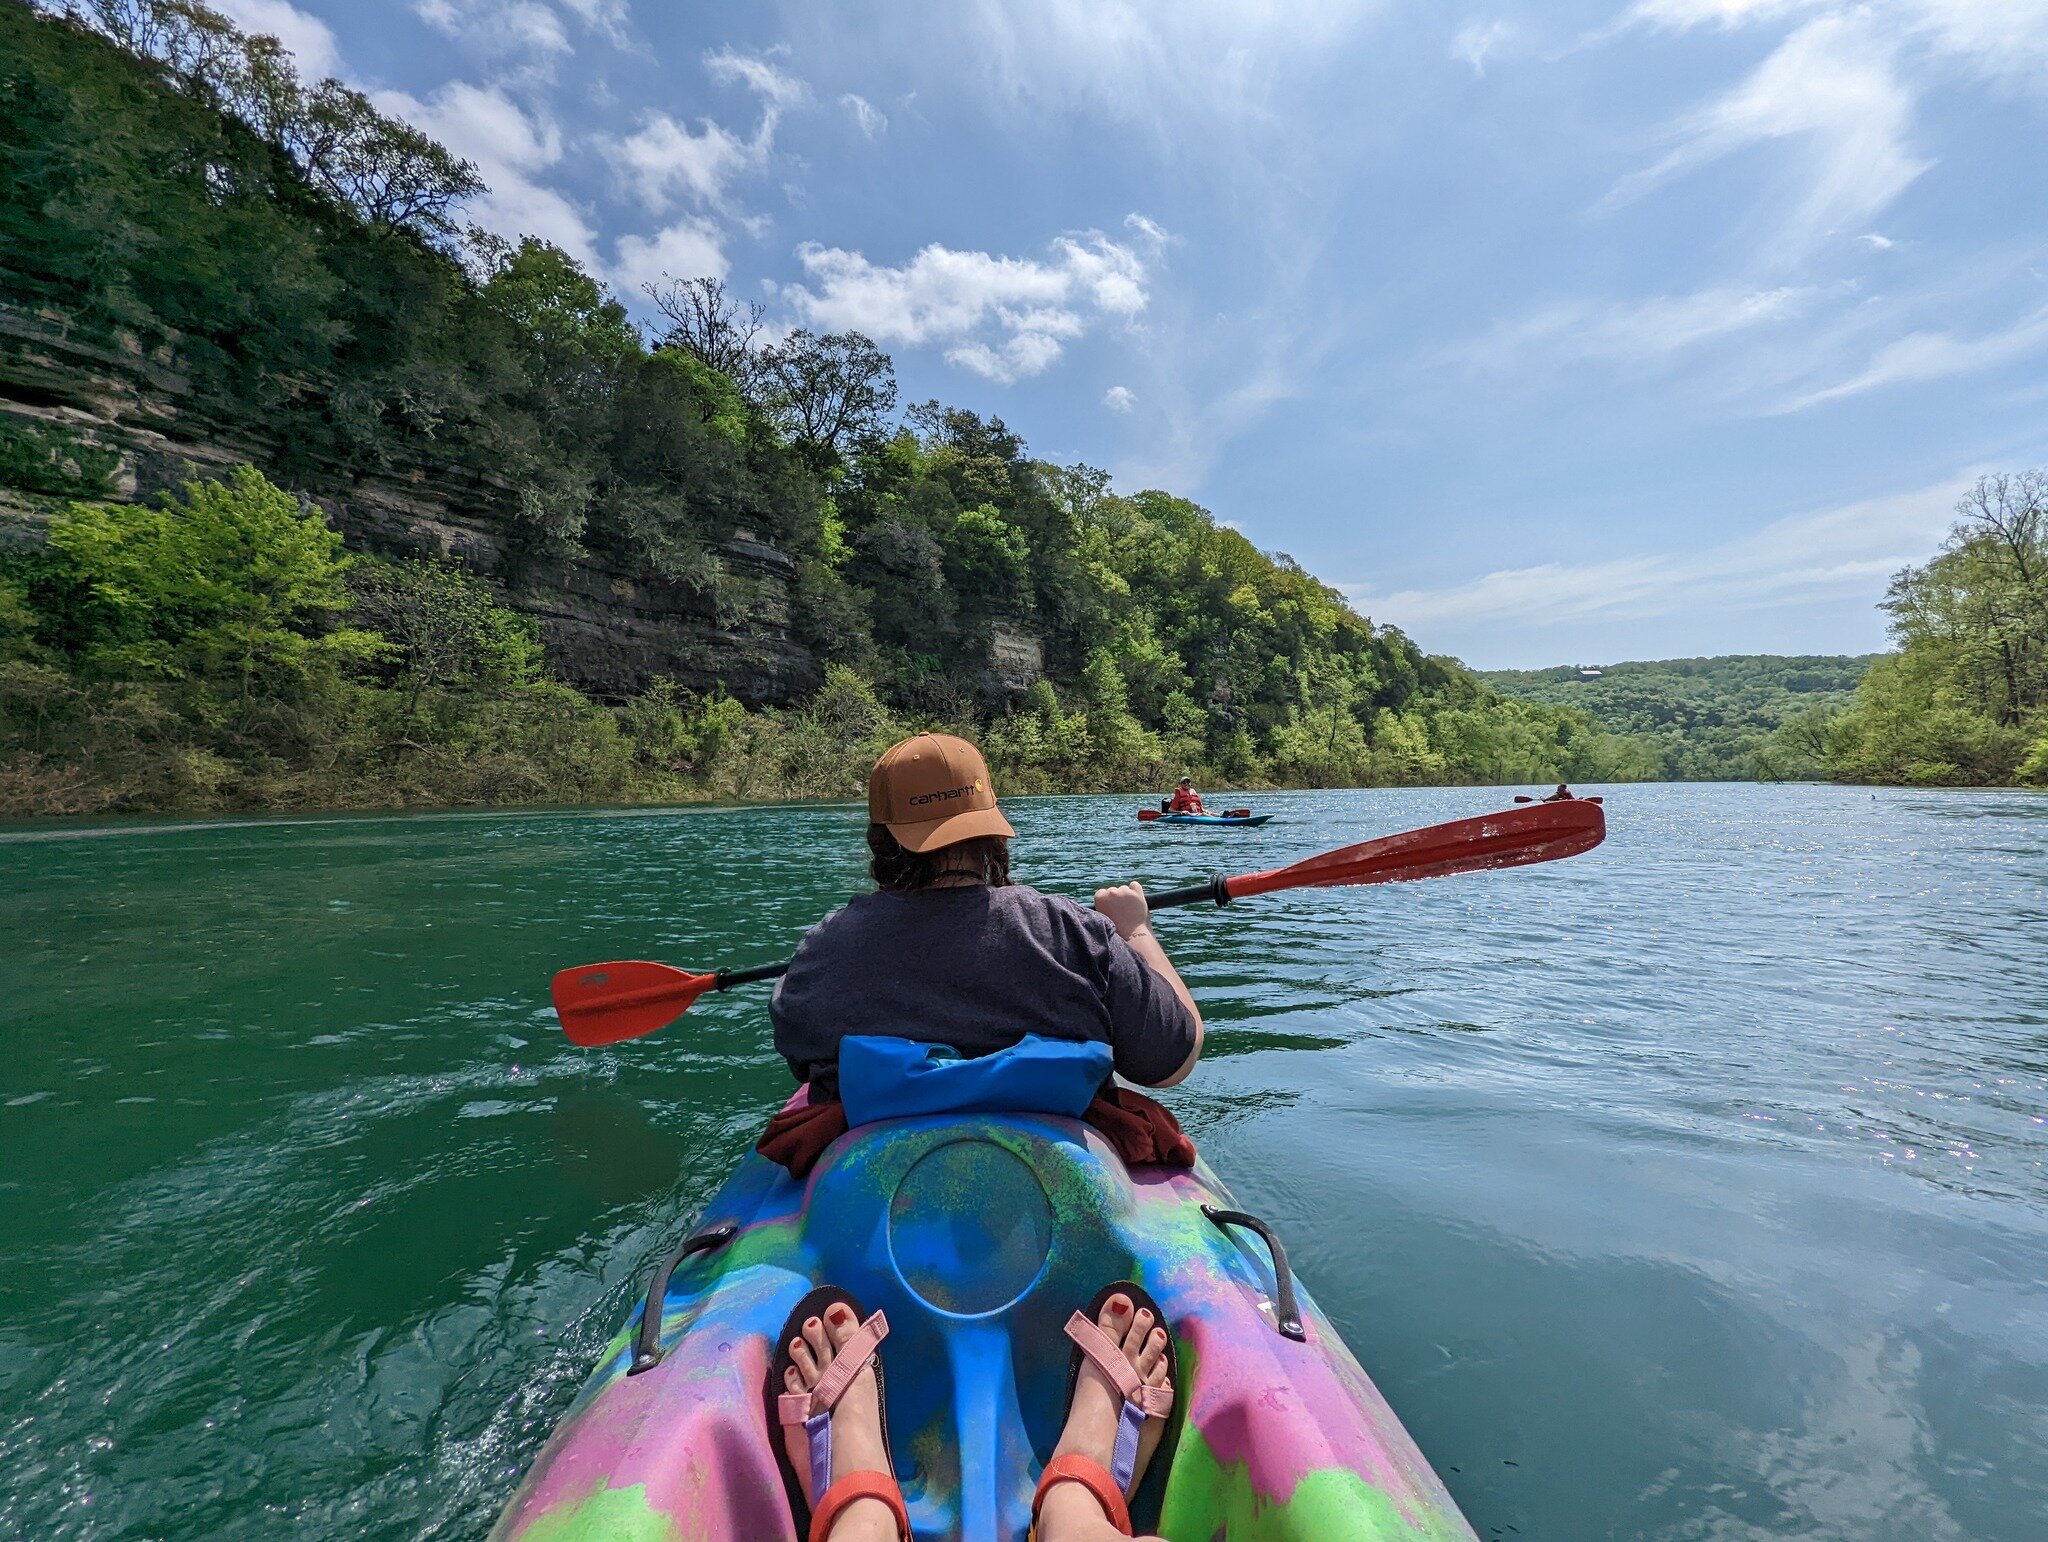 Our booking dates for 2023 are *live*! We just added some April dates - come and see us for some adventure on the water in Eureka Springs!

#eurekasprings #arkansas #visiteurekasprings #visitarkansas #whiteriver #whiteriverarkansas #floateureka #outd